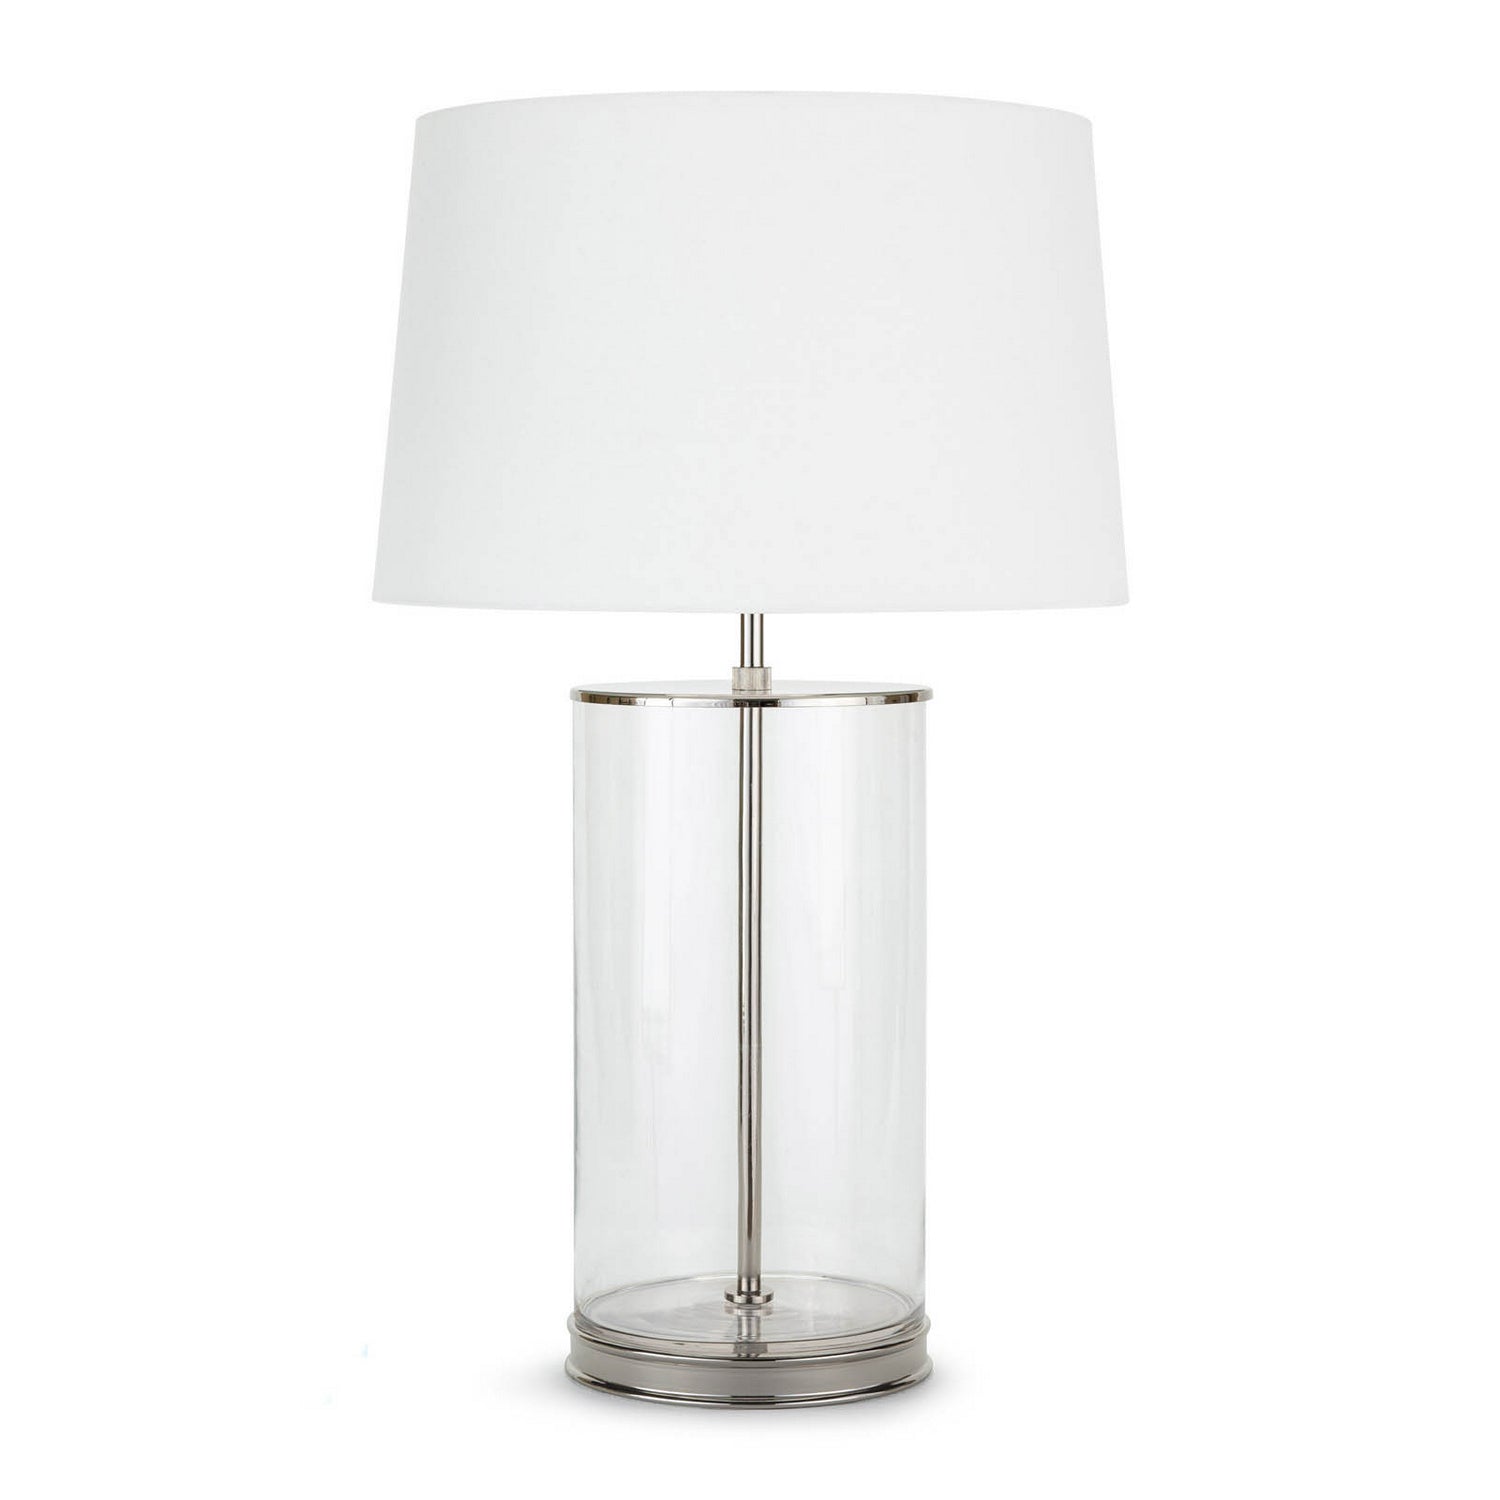 Regina Andrew - 13-1438PN - One Light Table Lamp - Magelian - Clear